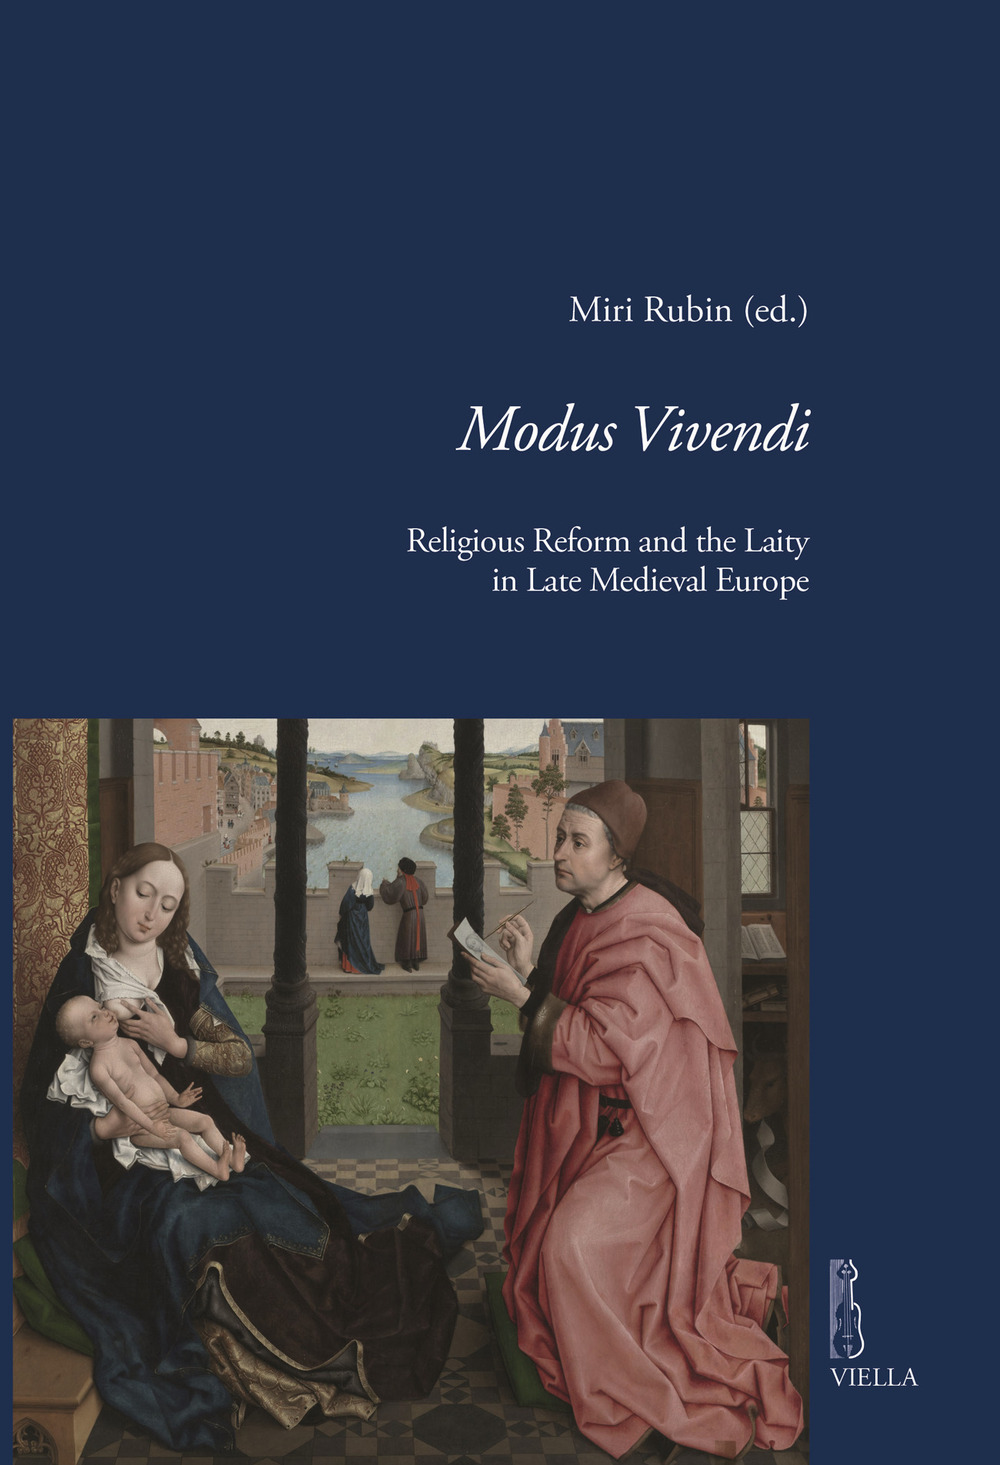 Modus vivendi. Religious reform and the laity in late medieval Europe